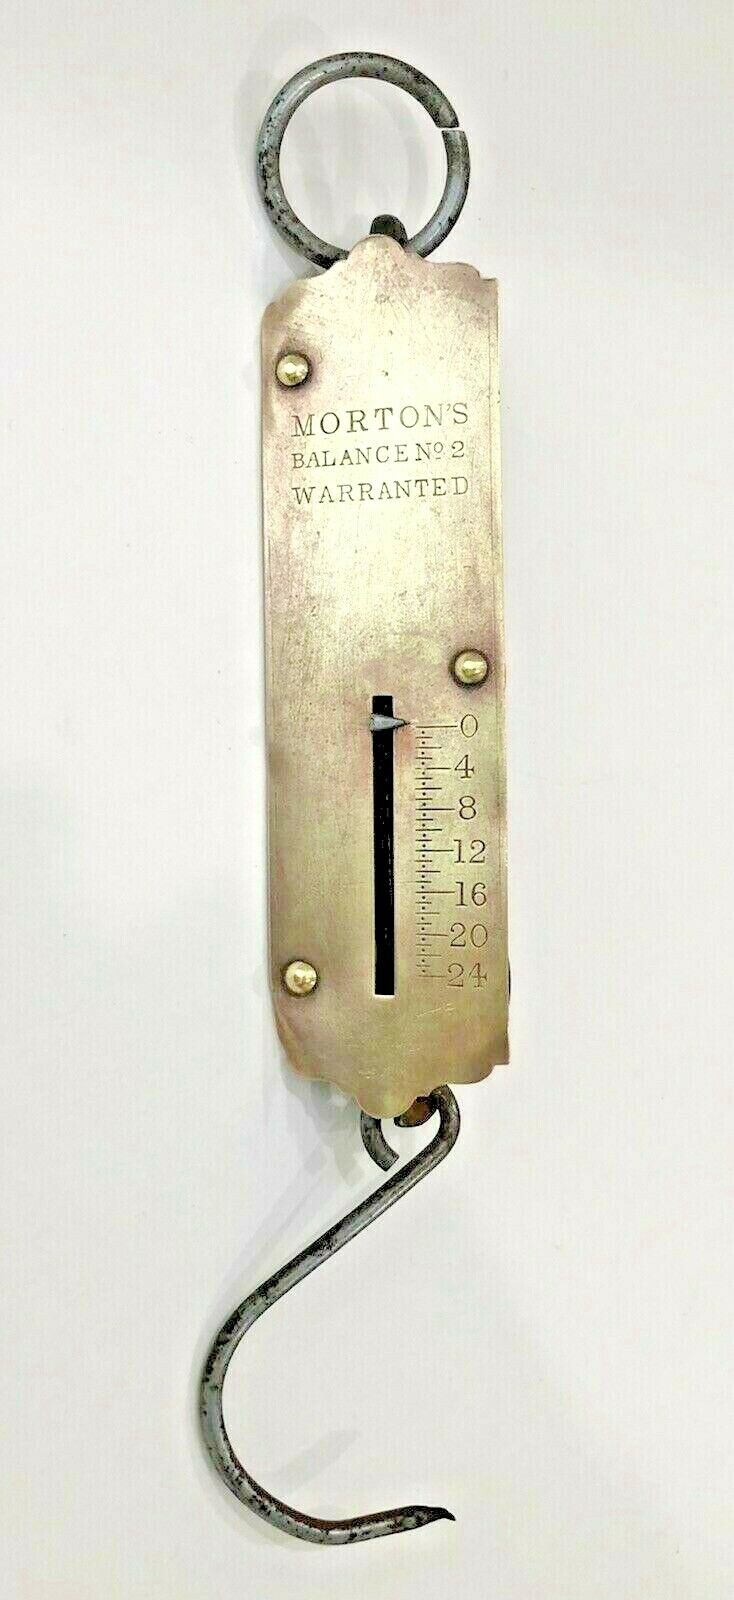 Vintage MORTON'S BALANCE NO. 2 Brass/Cast Hanging Fish Scale - To 24 lbs.